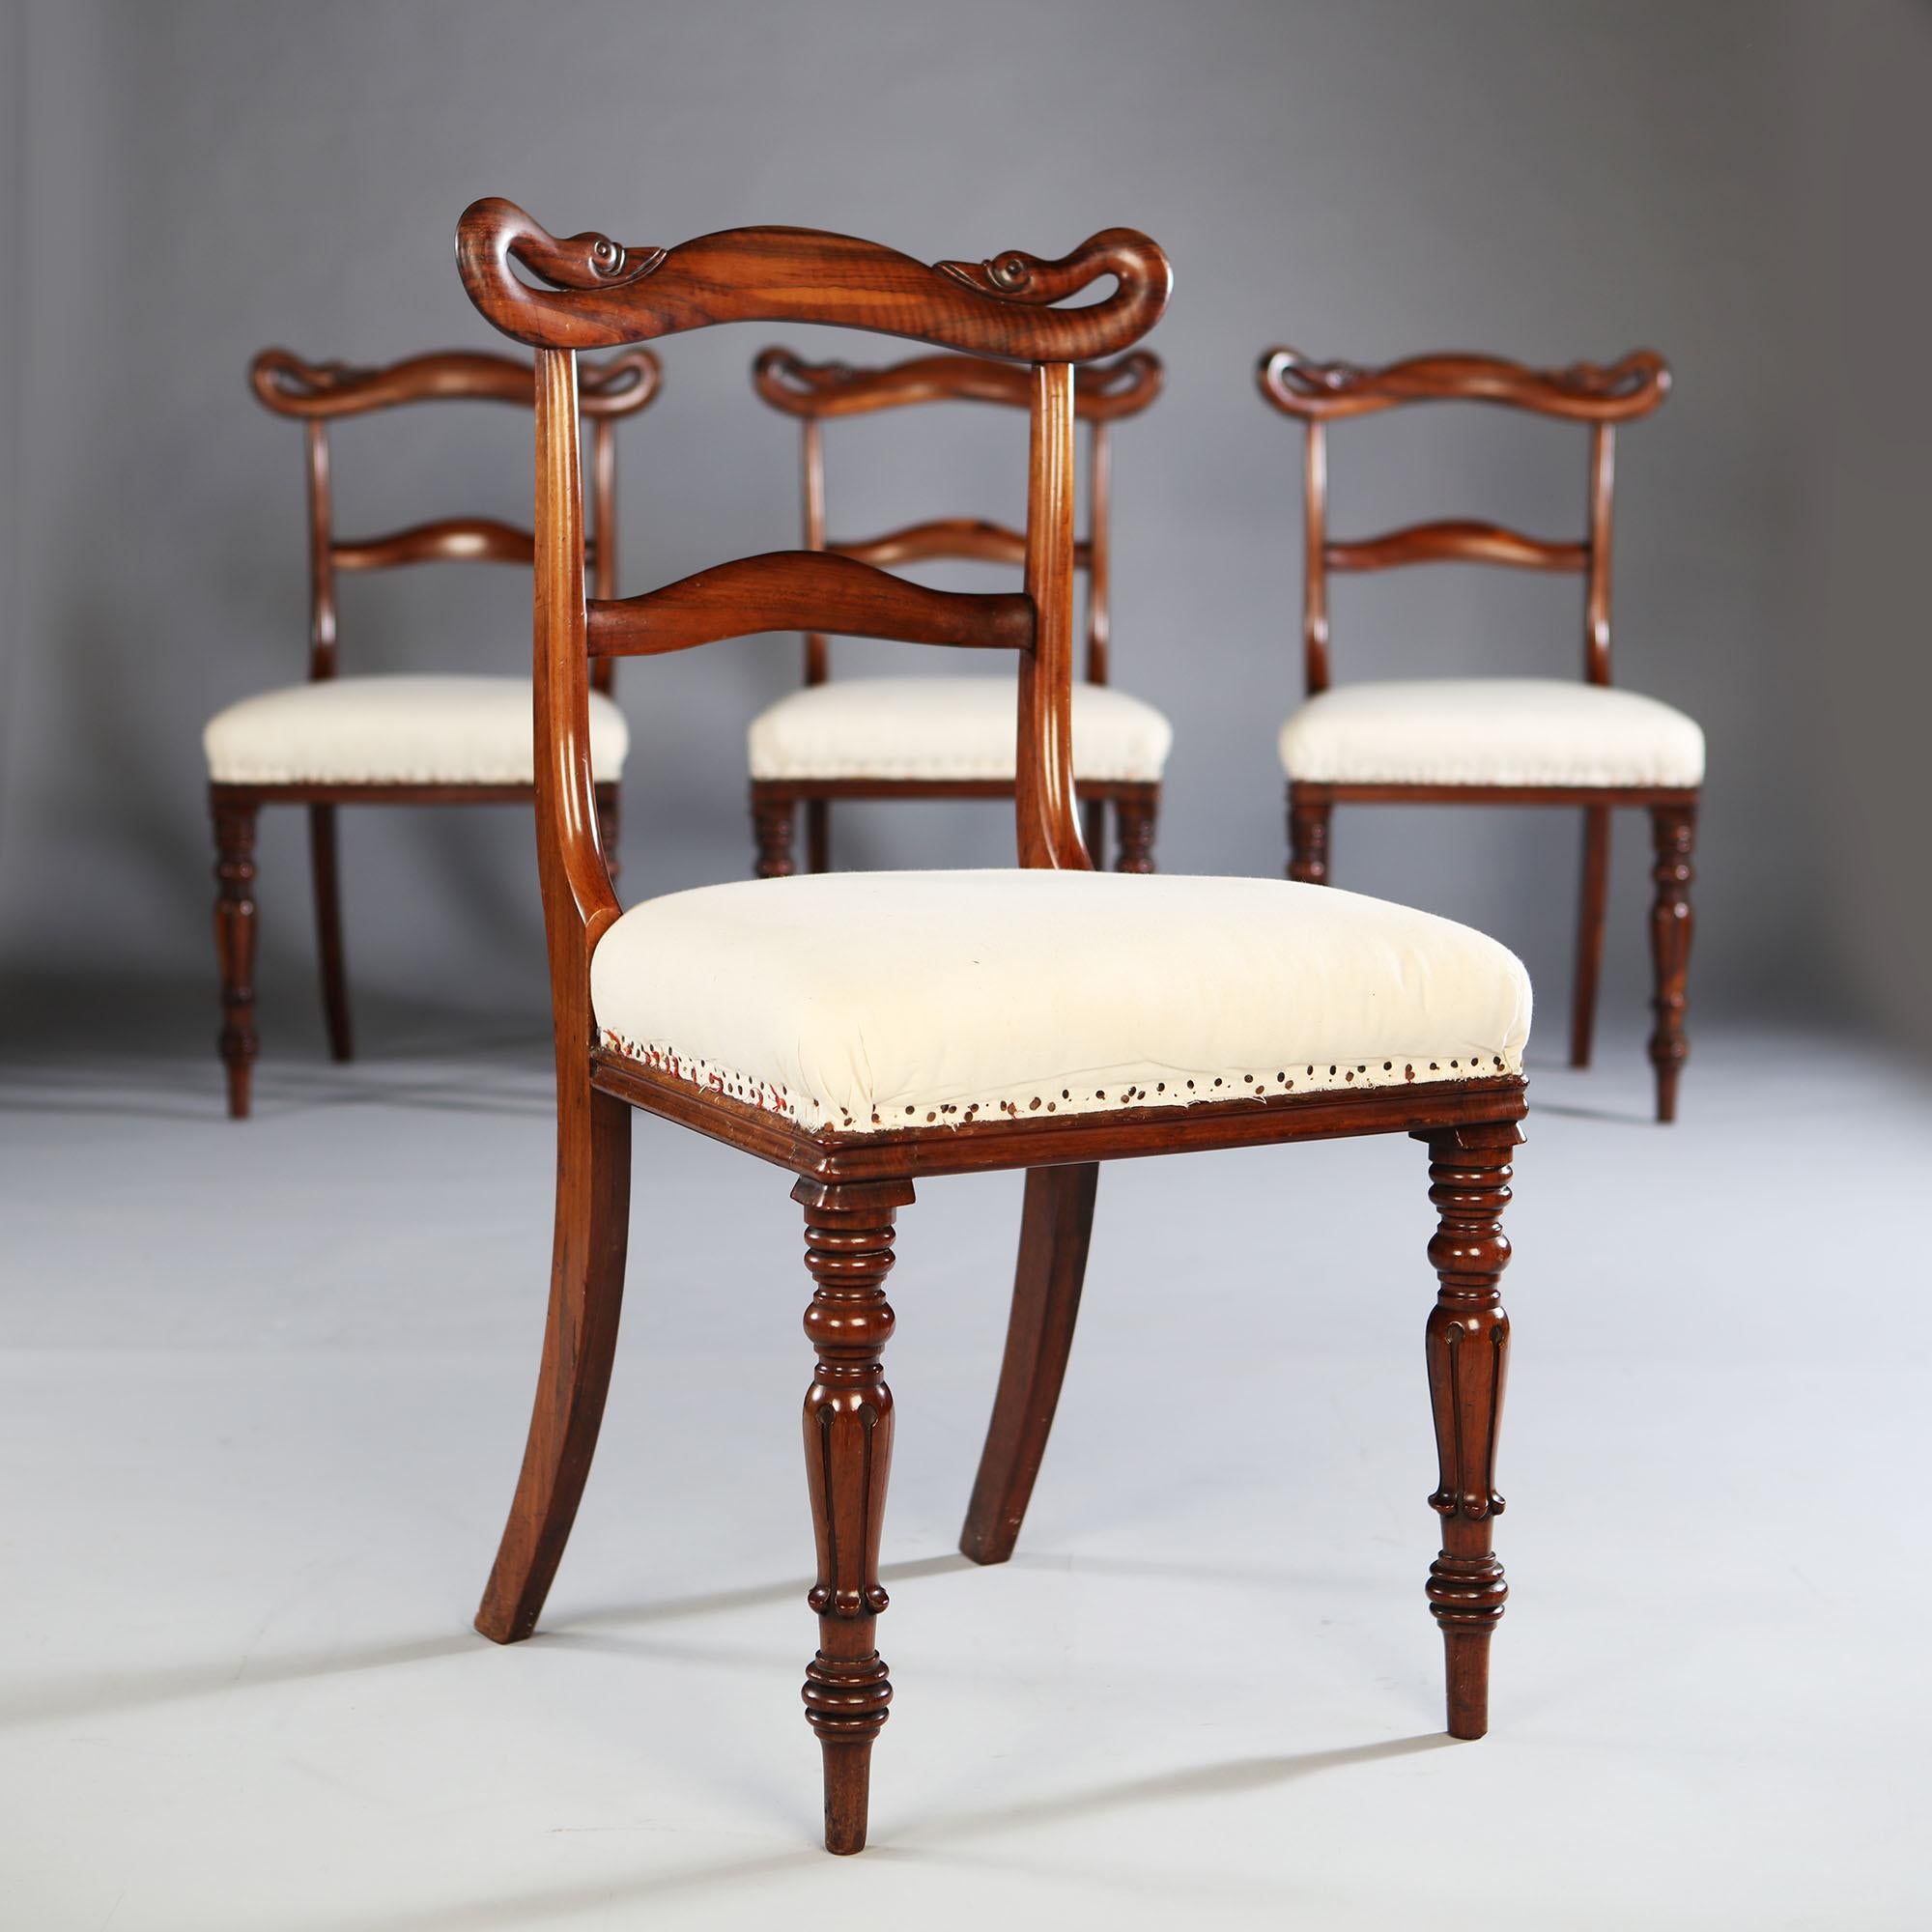 A set of four unusual Goncalo Alves side chairs, with scrolling swan necks to the back splats.